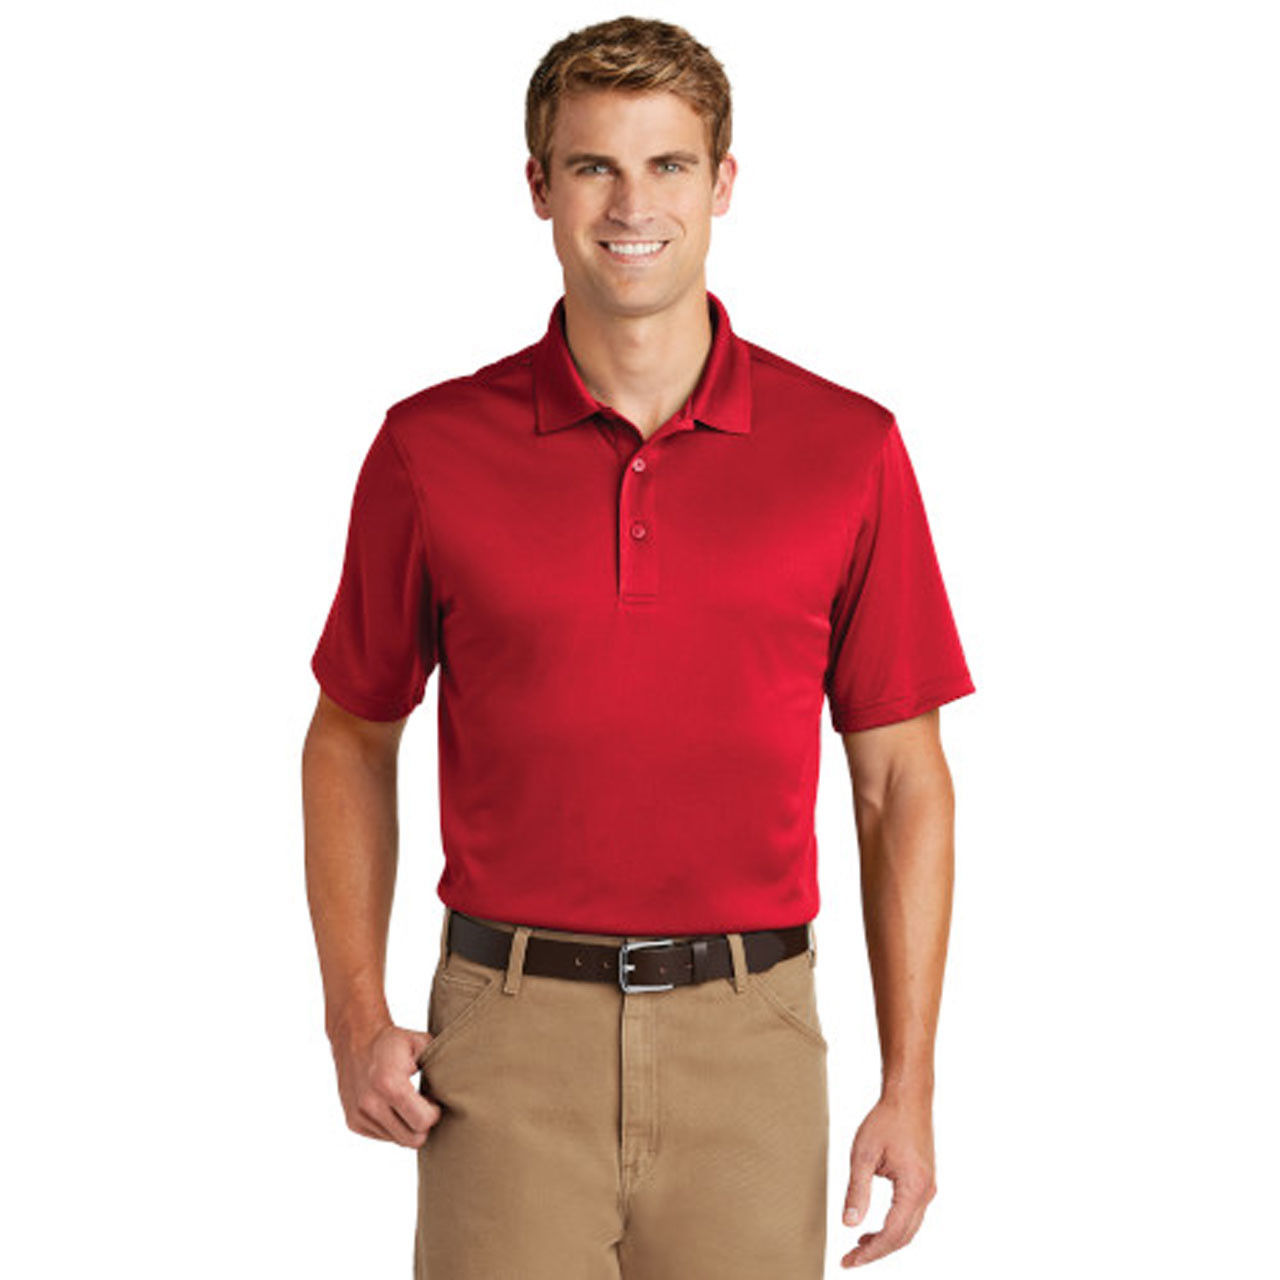 What's the material of the men's red collared shirt?